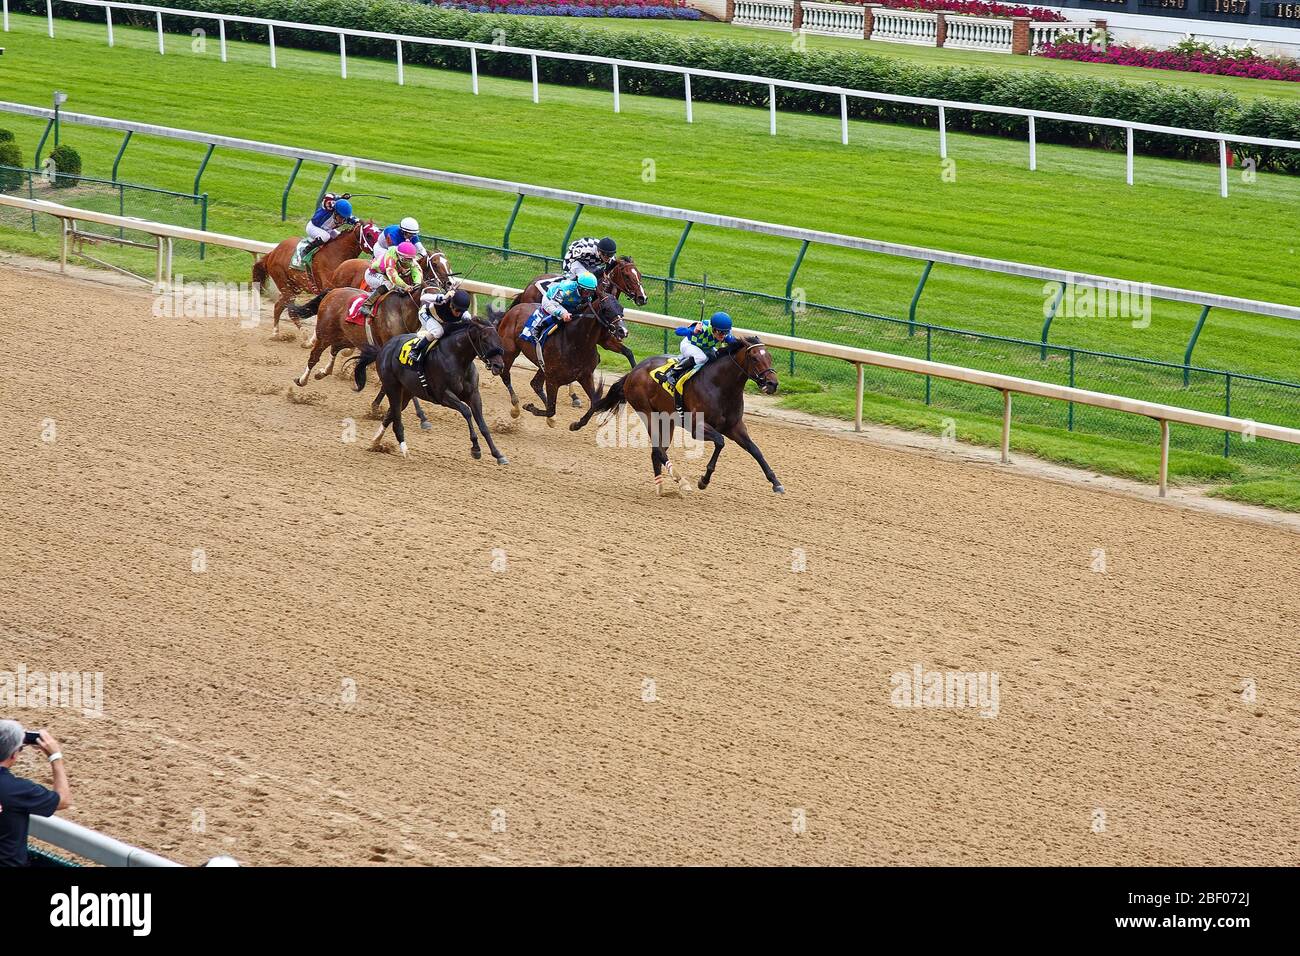 horse race, 7 equines, jockeys wearing silks, fast, competition, sport, dirt track, dirt flying, animals, Churchill Downs Racetrack; Kentucky; USA, Lo Stock Photo